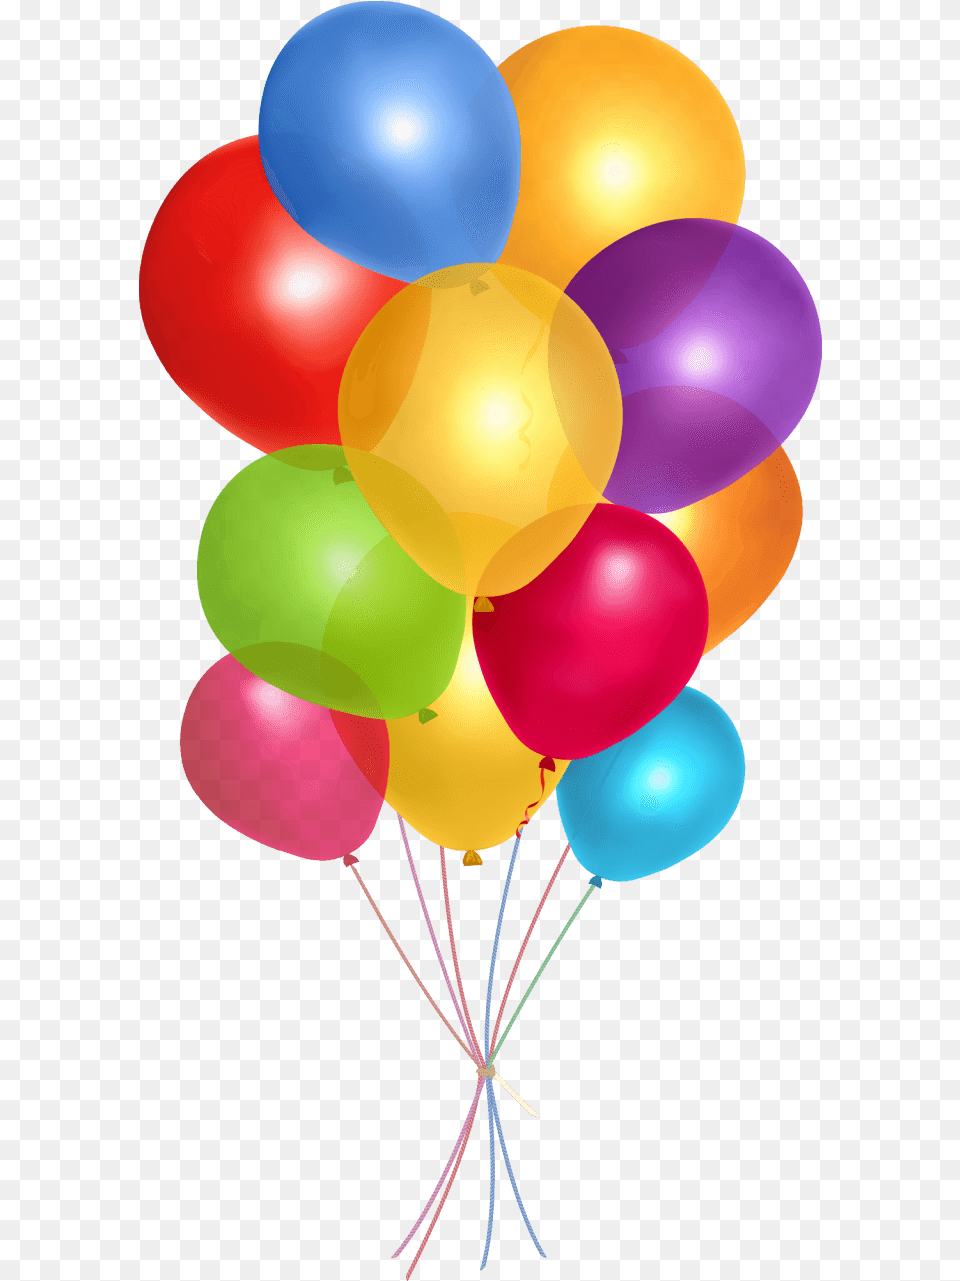 Balloons Background, Balloon Png Image